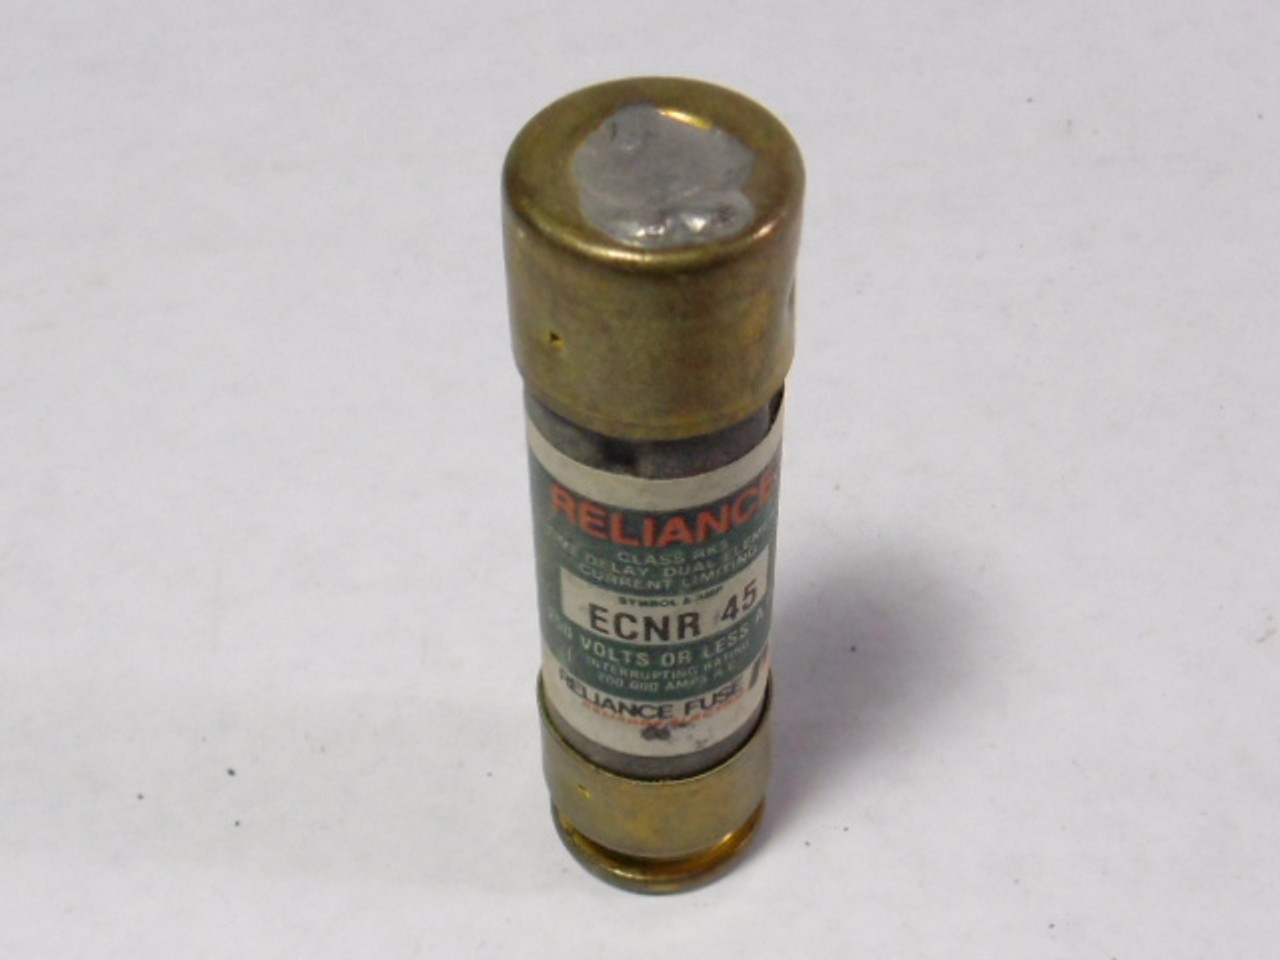 Reliance ECNR-45 Fuse 45A 250V USED